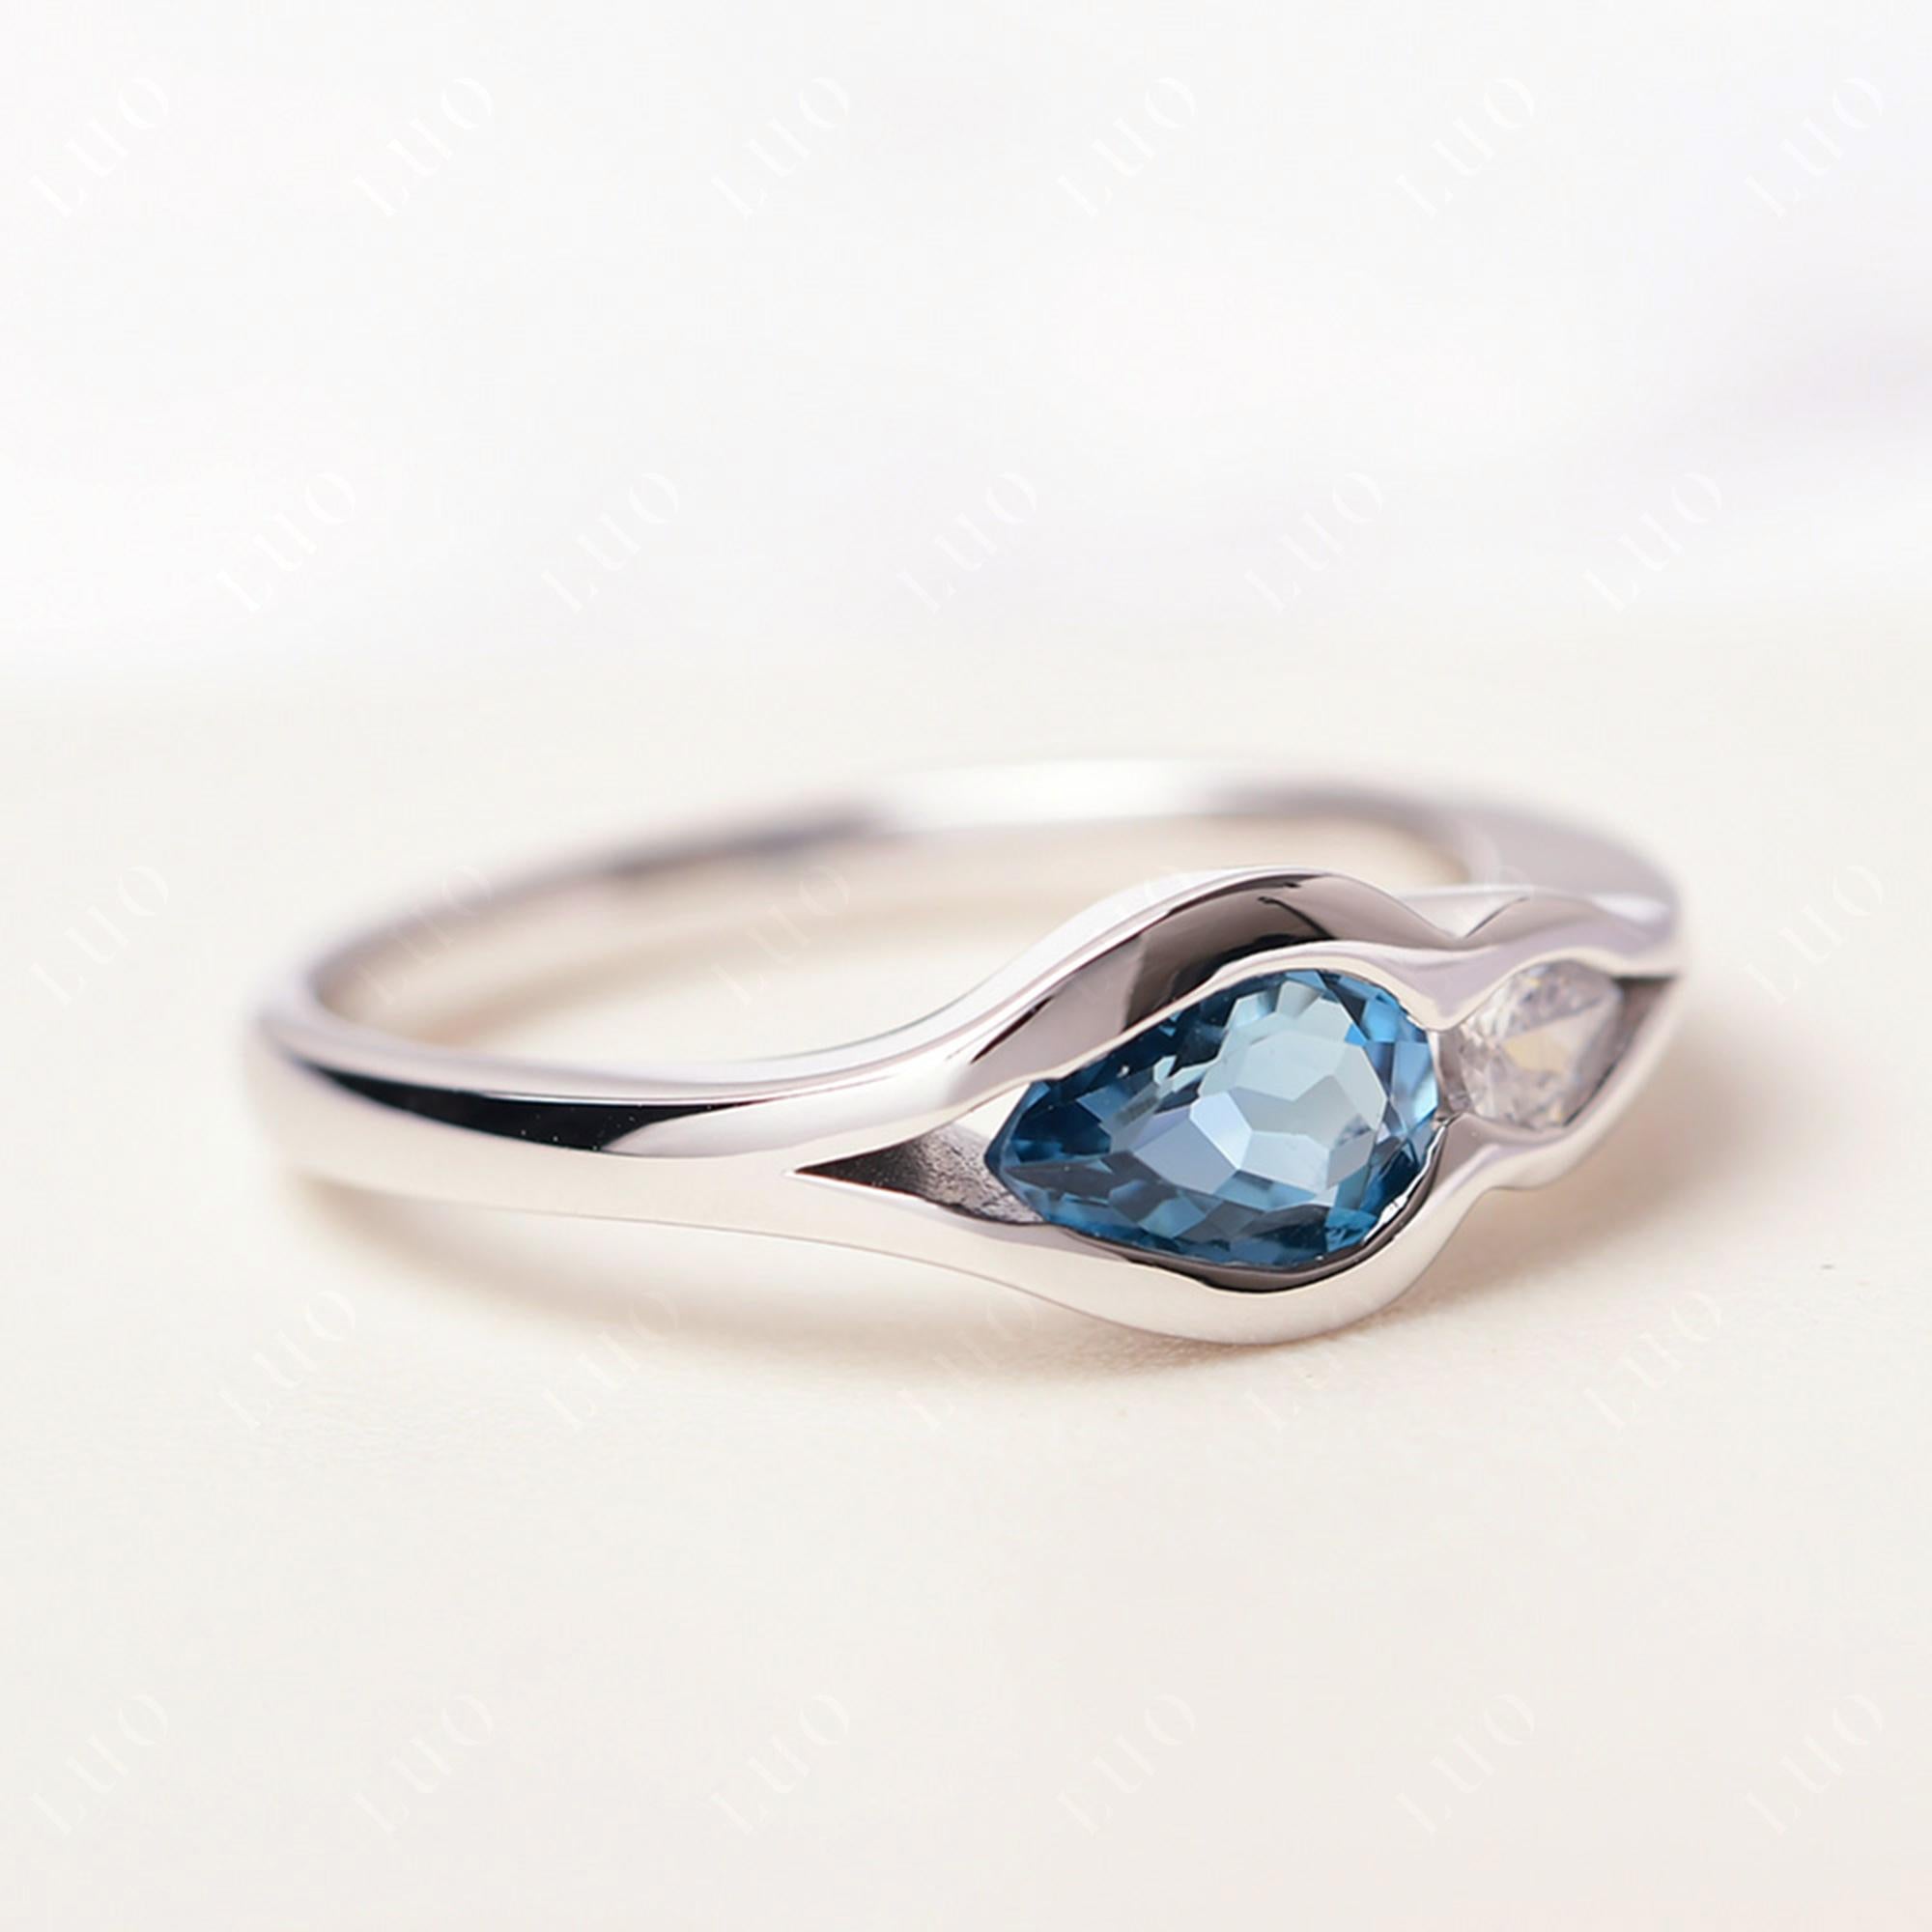 Vintage London Blue Topaz Bezel Pear Engagement Ring - LUO Jewelry